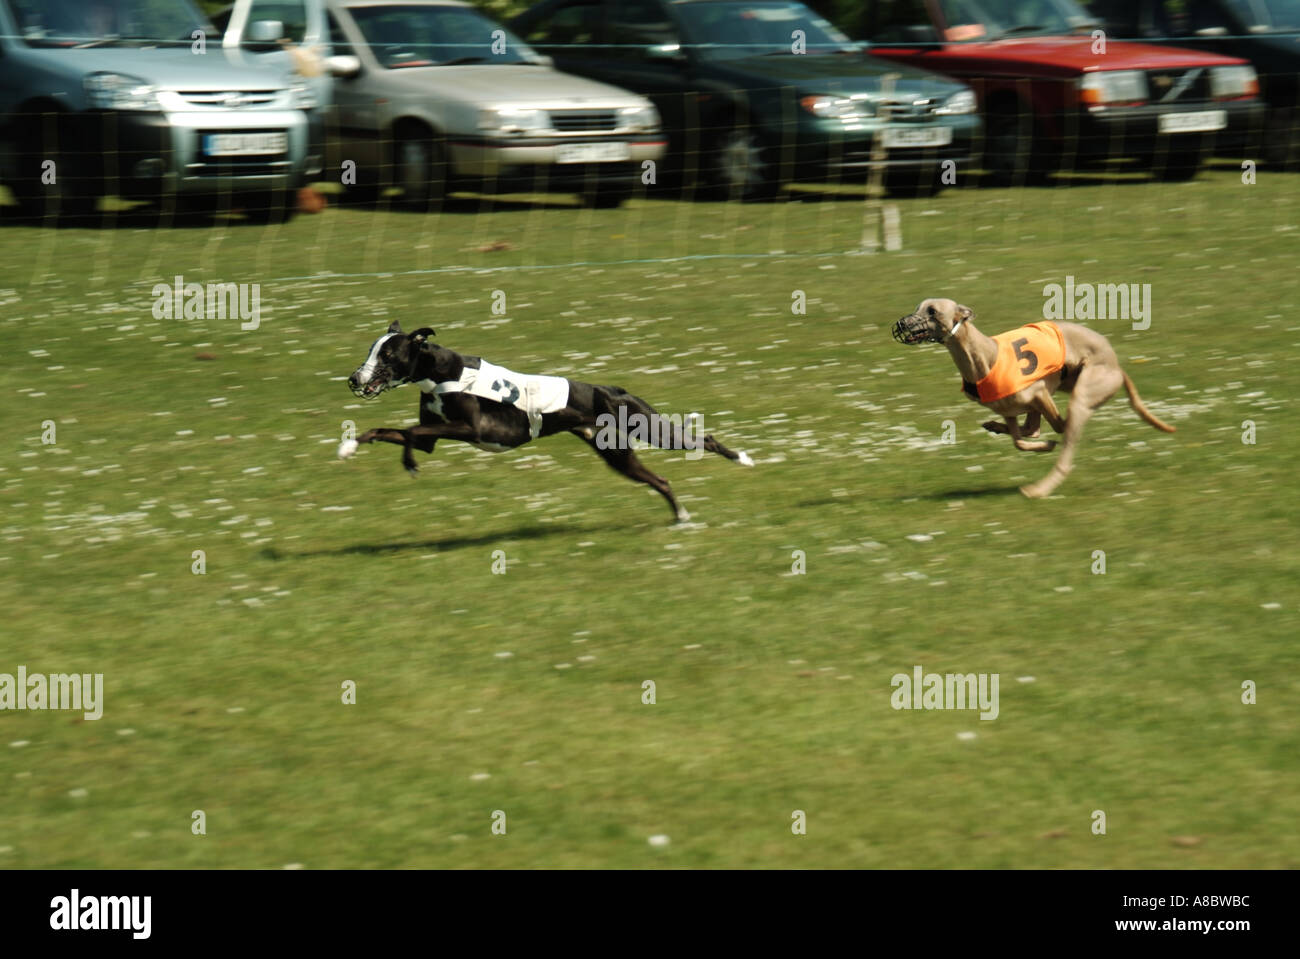 Inghilterra dog show event whippet racing Foto Stock